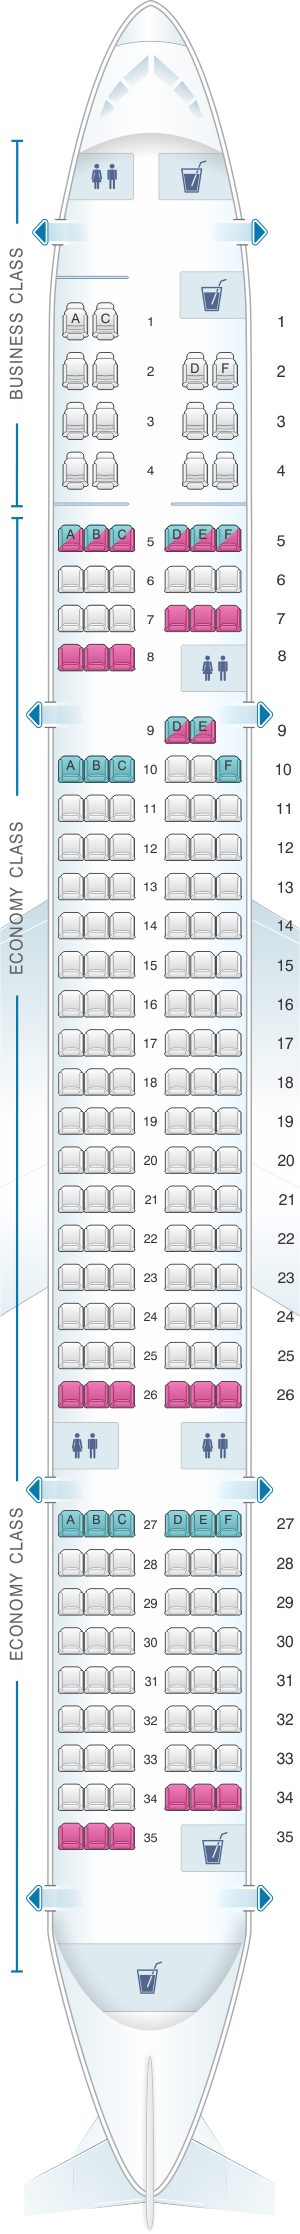 Seat map for US Airways Boeing B757 200 190pax